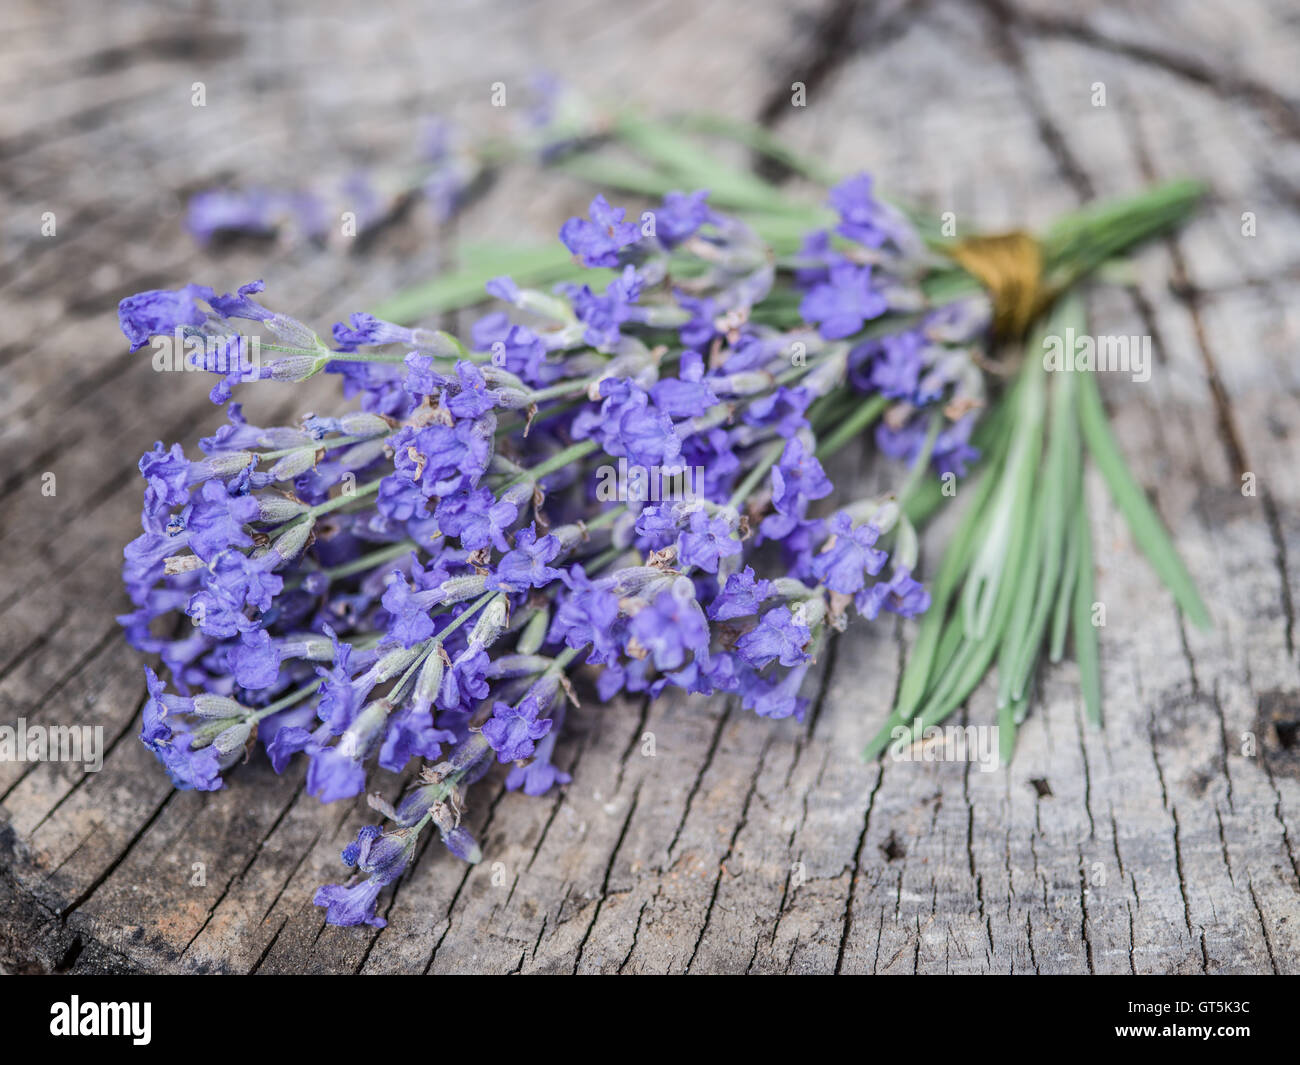 Bunch of lavandula or lavender flowers on the old wooden table. Stock Photo